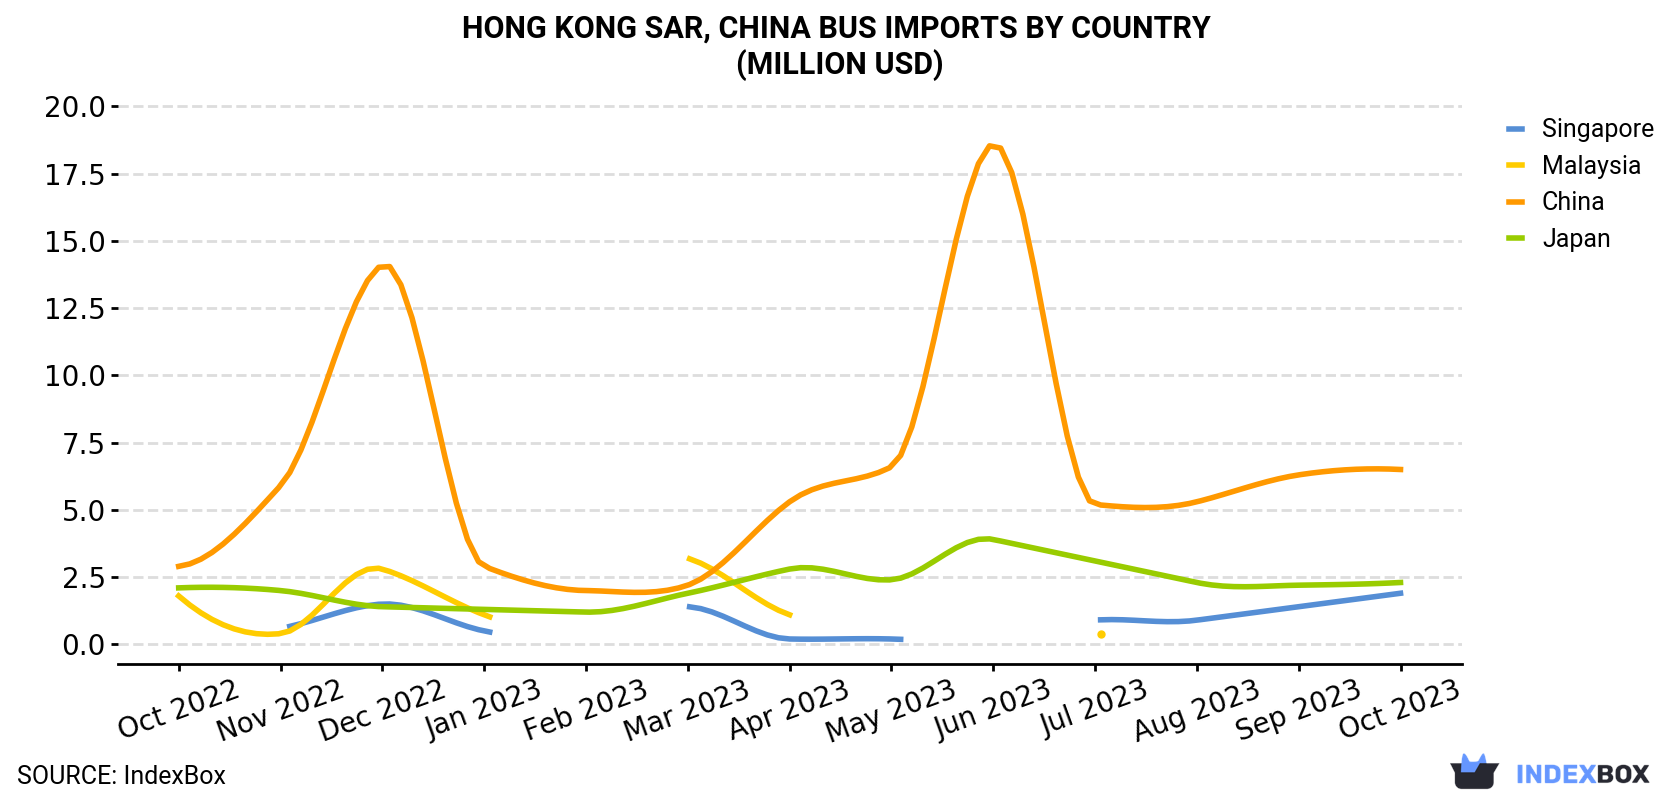 Hong Kong Bus Imports By Country (Million USD)